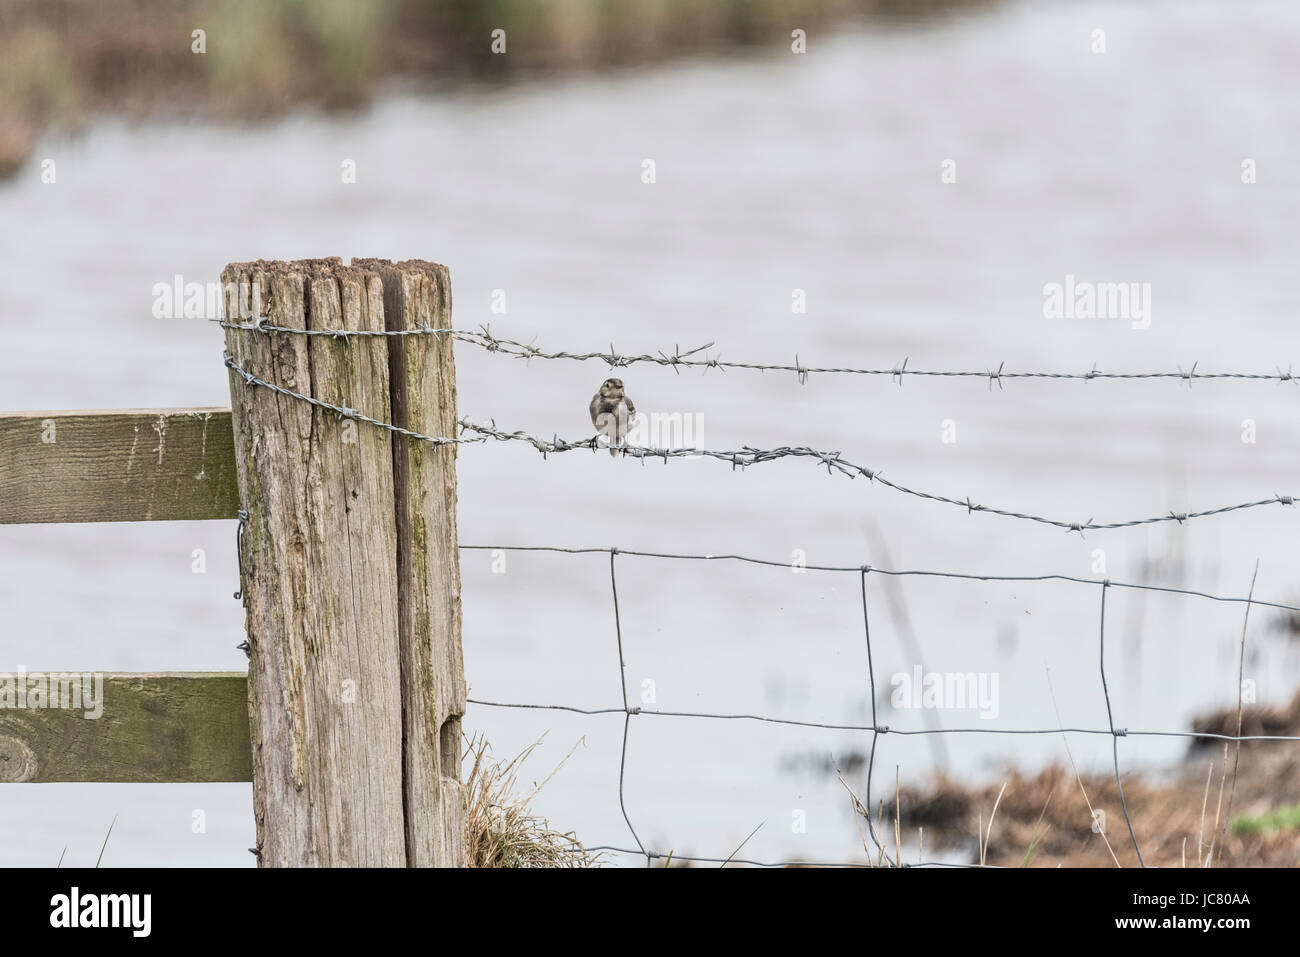 A young Pied Wagtail (Motacilla alba yarrellii) perched on a wire fence Stock Photo